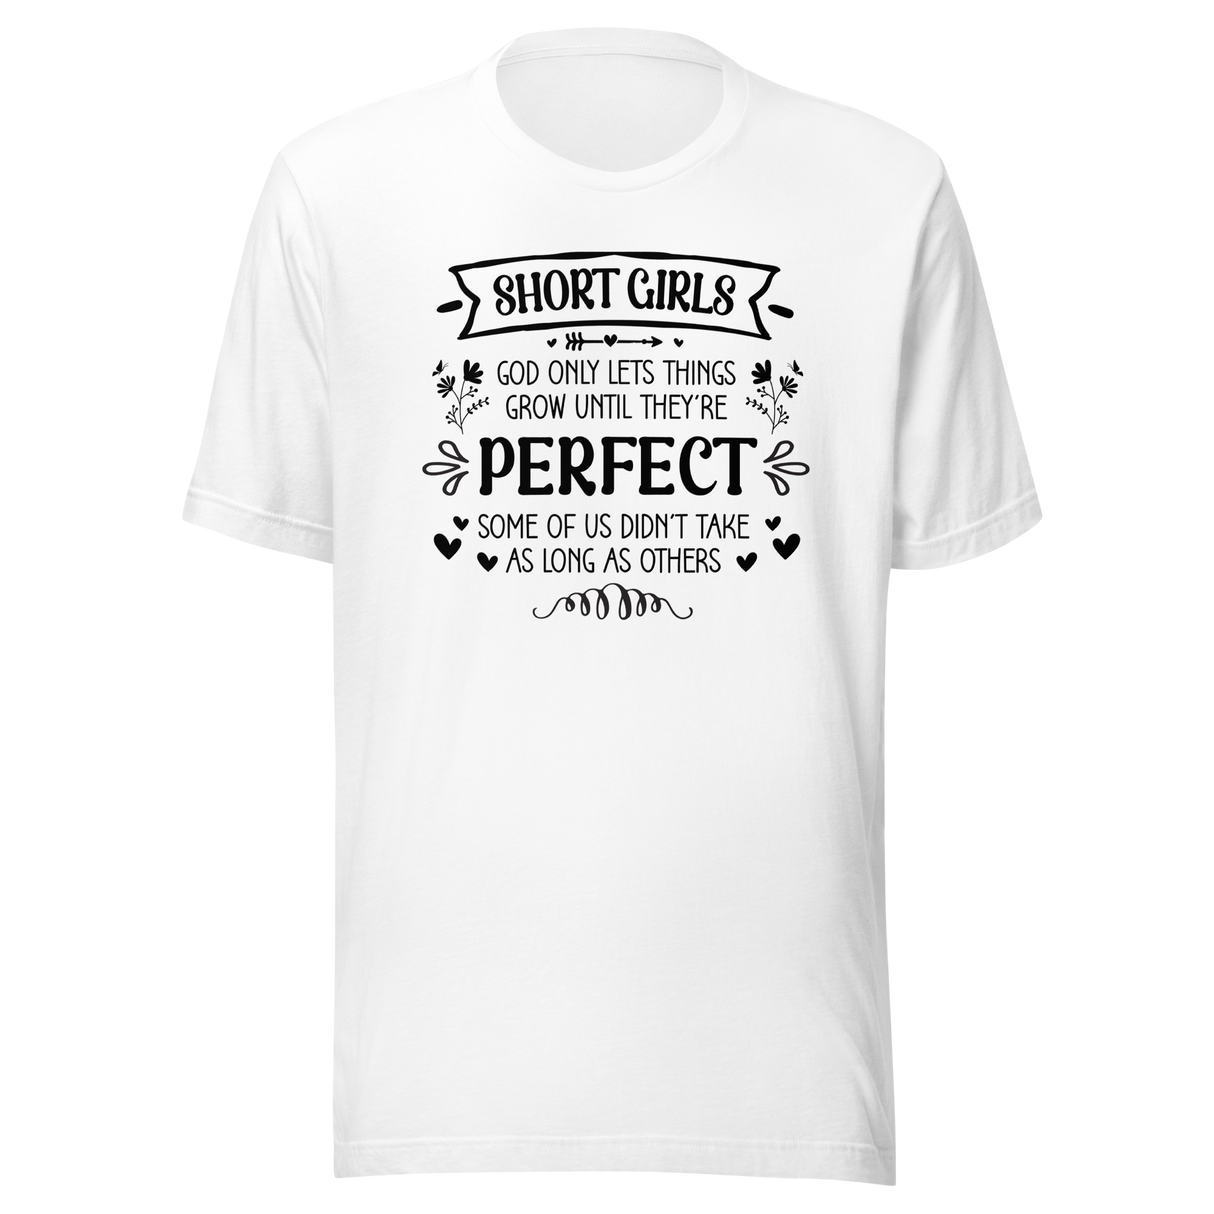 short-girls-god-only-lets-things-grow-until-theyre-perfect-some-of-us-didnt-take-as-long-as-others-life-tee-inspirational-t-shirt-empowering-tee-short-t-shirt-girls-tee#color_white